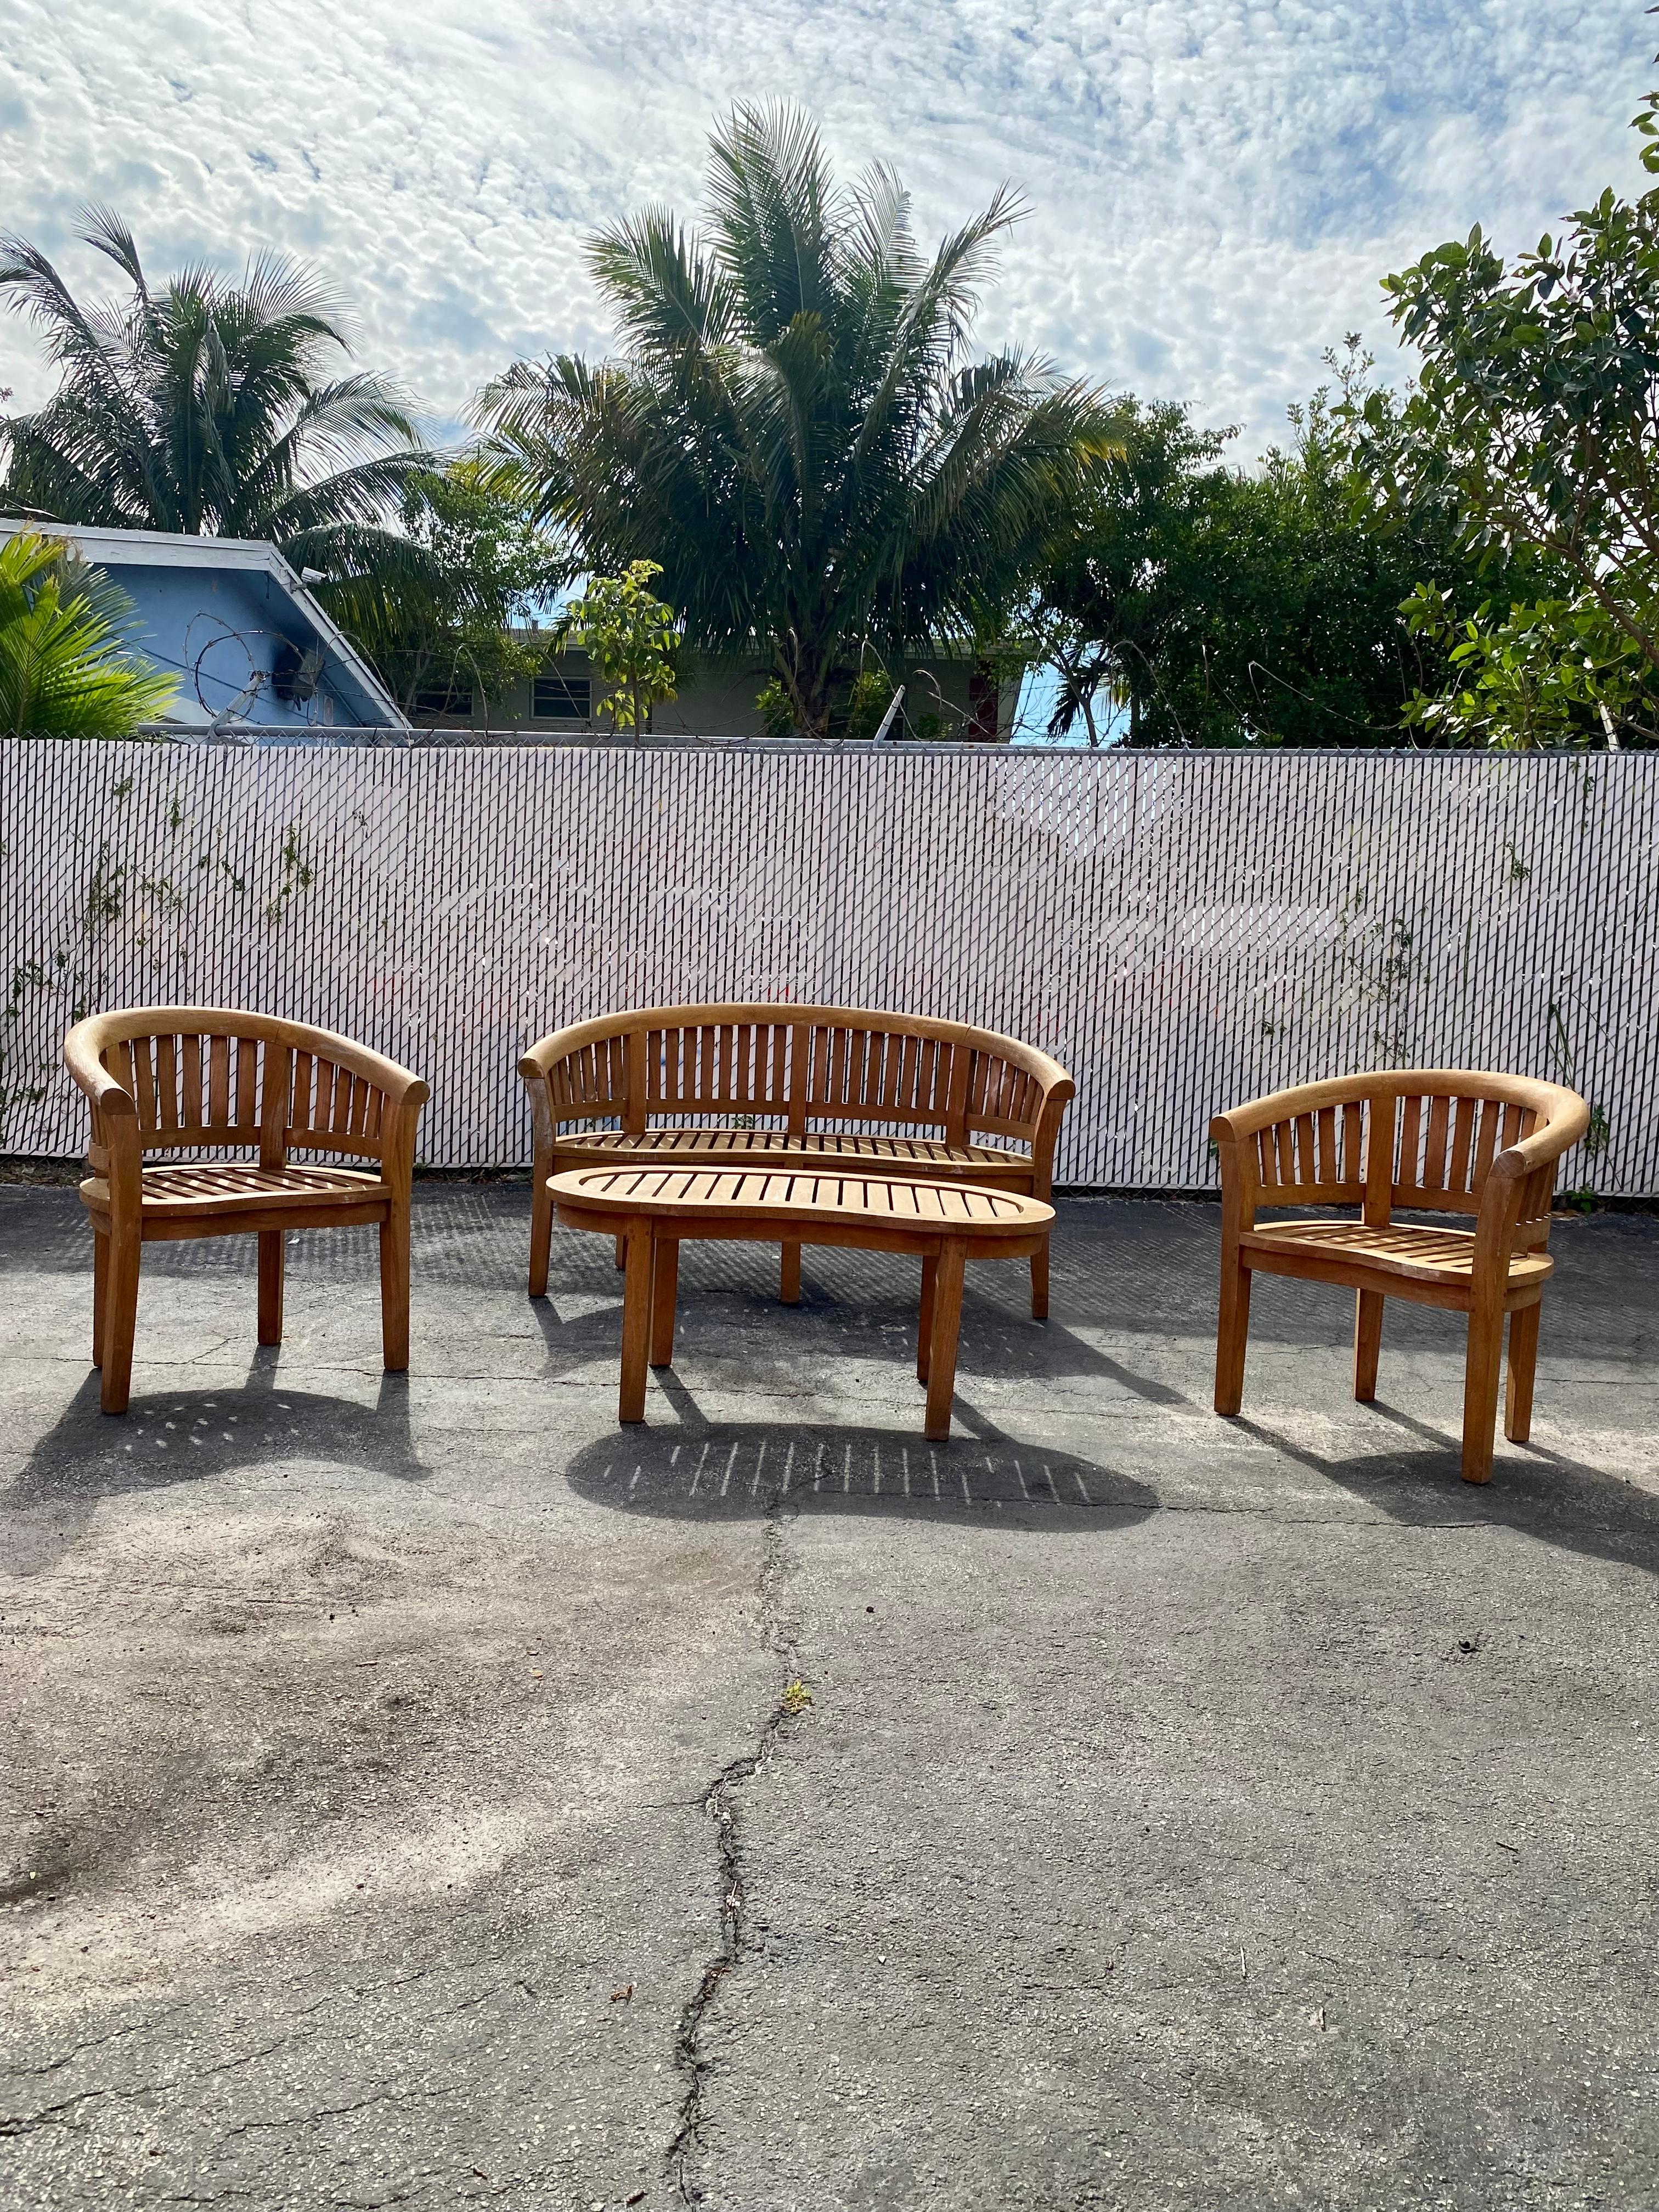 1970s Teak Curved Barrel Kidney Slatted Settee Table Chairs, Set of 4 In Good Condition For Sale In Fort Lauderdale, FL